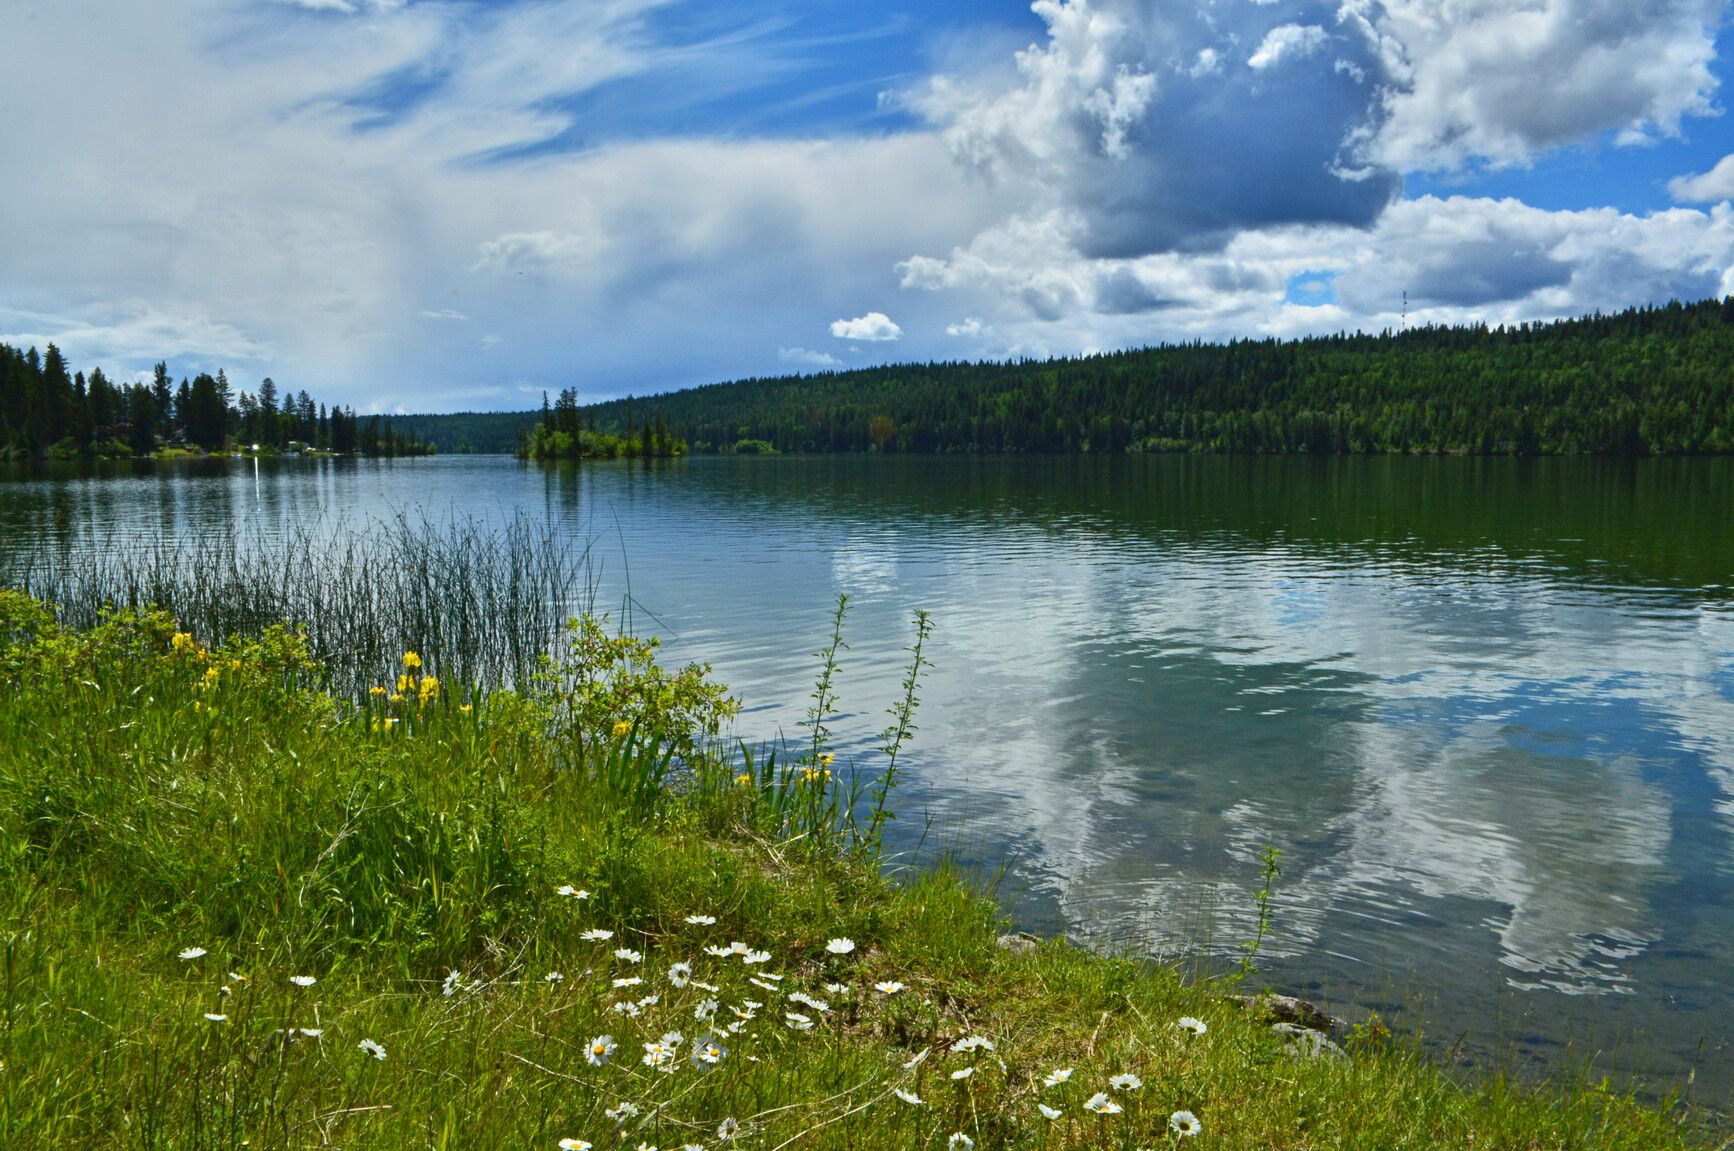 Wild flowers in bloom under the blue sky, which reflects on the soft ripples on the surface of Lac La Hache.